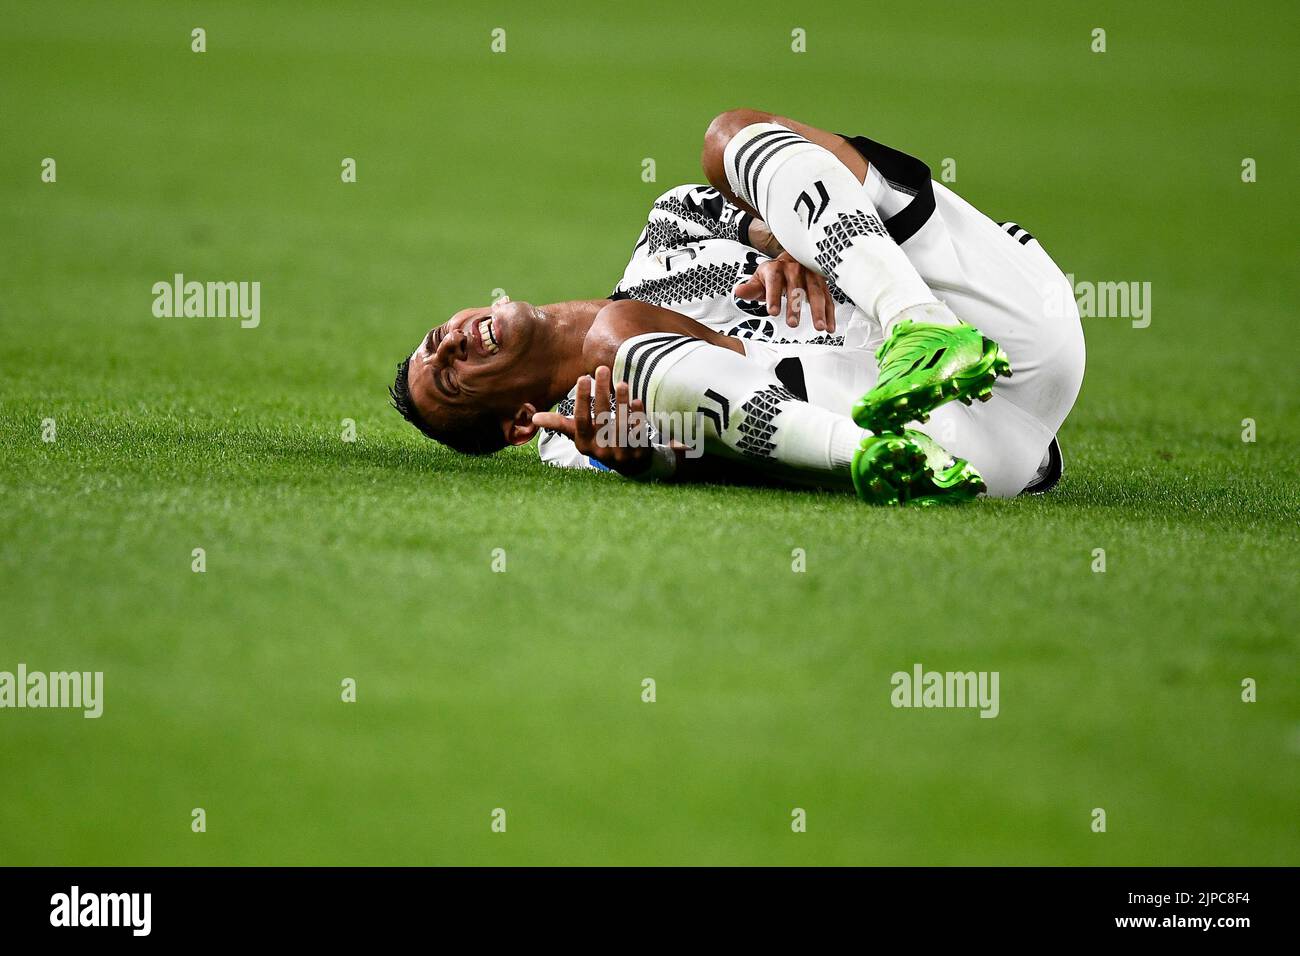 Turin, Italy. 15 August 2022. Angel Di Maria of Juventus FC suffers an injury during the Serie A football match between Juventus FC and US Sassuolo. Credit: Nicolò Campo/Alamy Live News Stock Photo